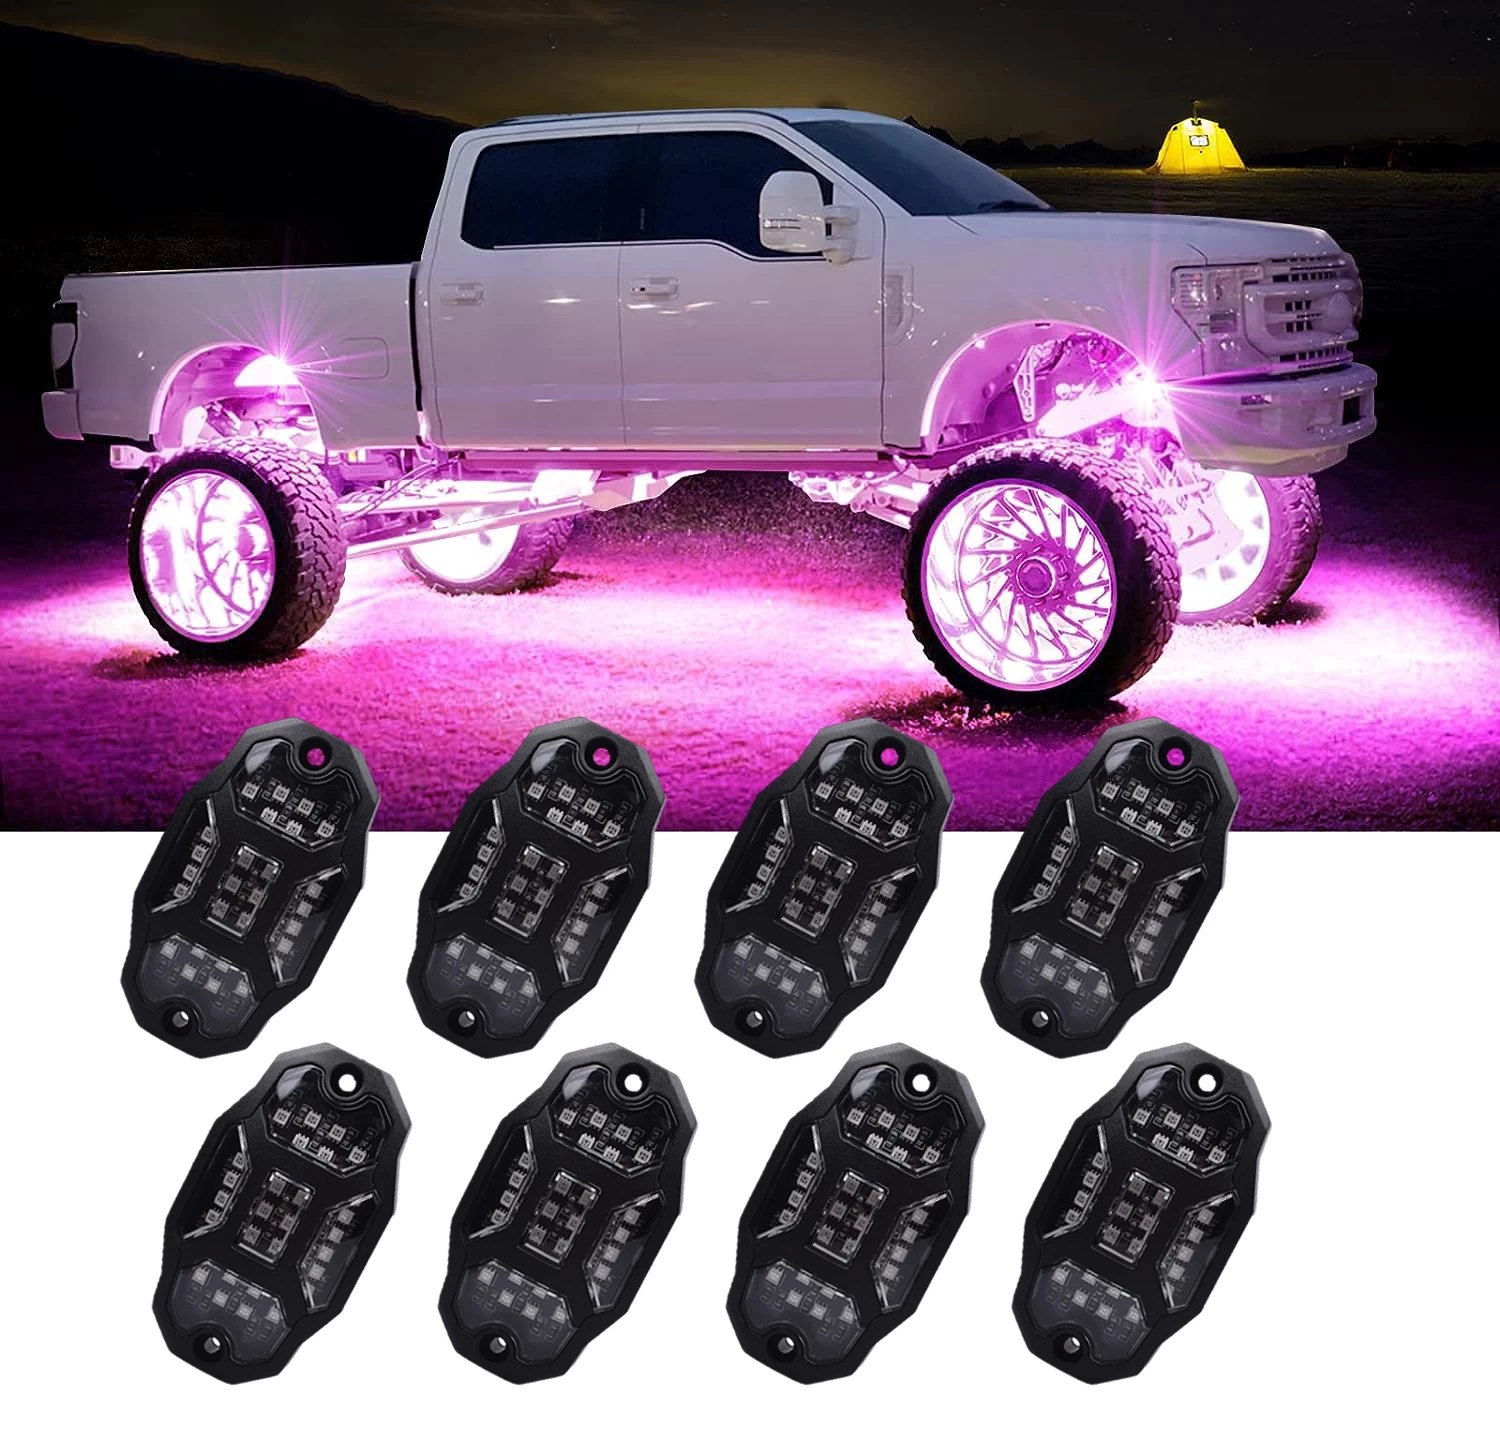 China Undergolw Light For Car Jeep Off-Road Truck Boat Bluetooth APP Control 4/6/8 In 1 RGB LED Rock Lights Chassis Light Music Sync - COPY - bav4w2 fabrikant